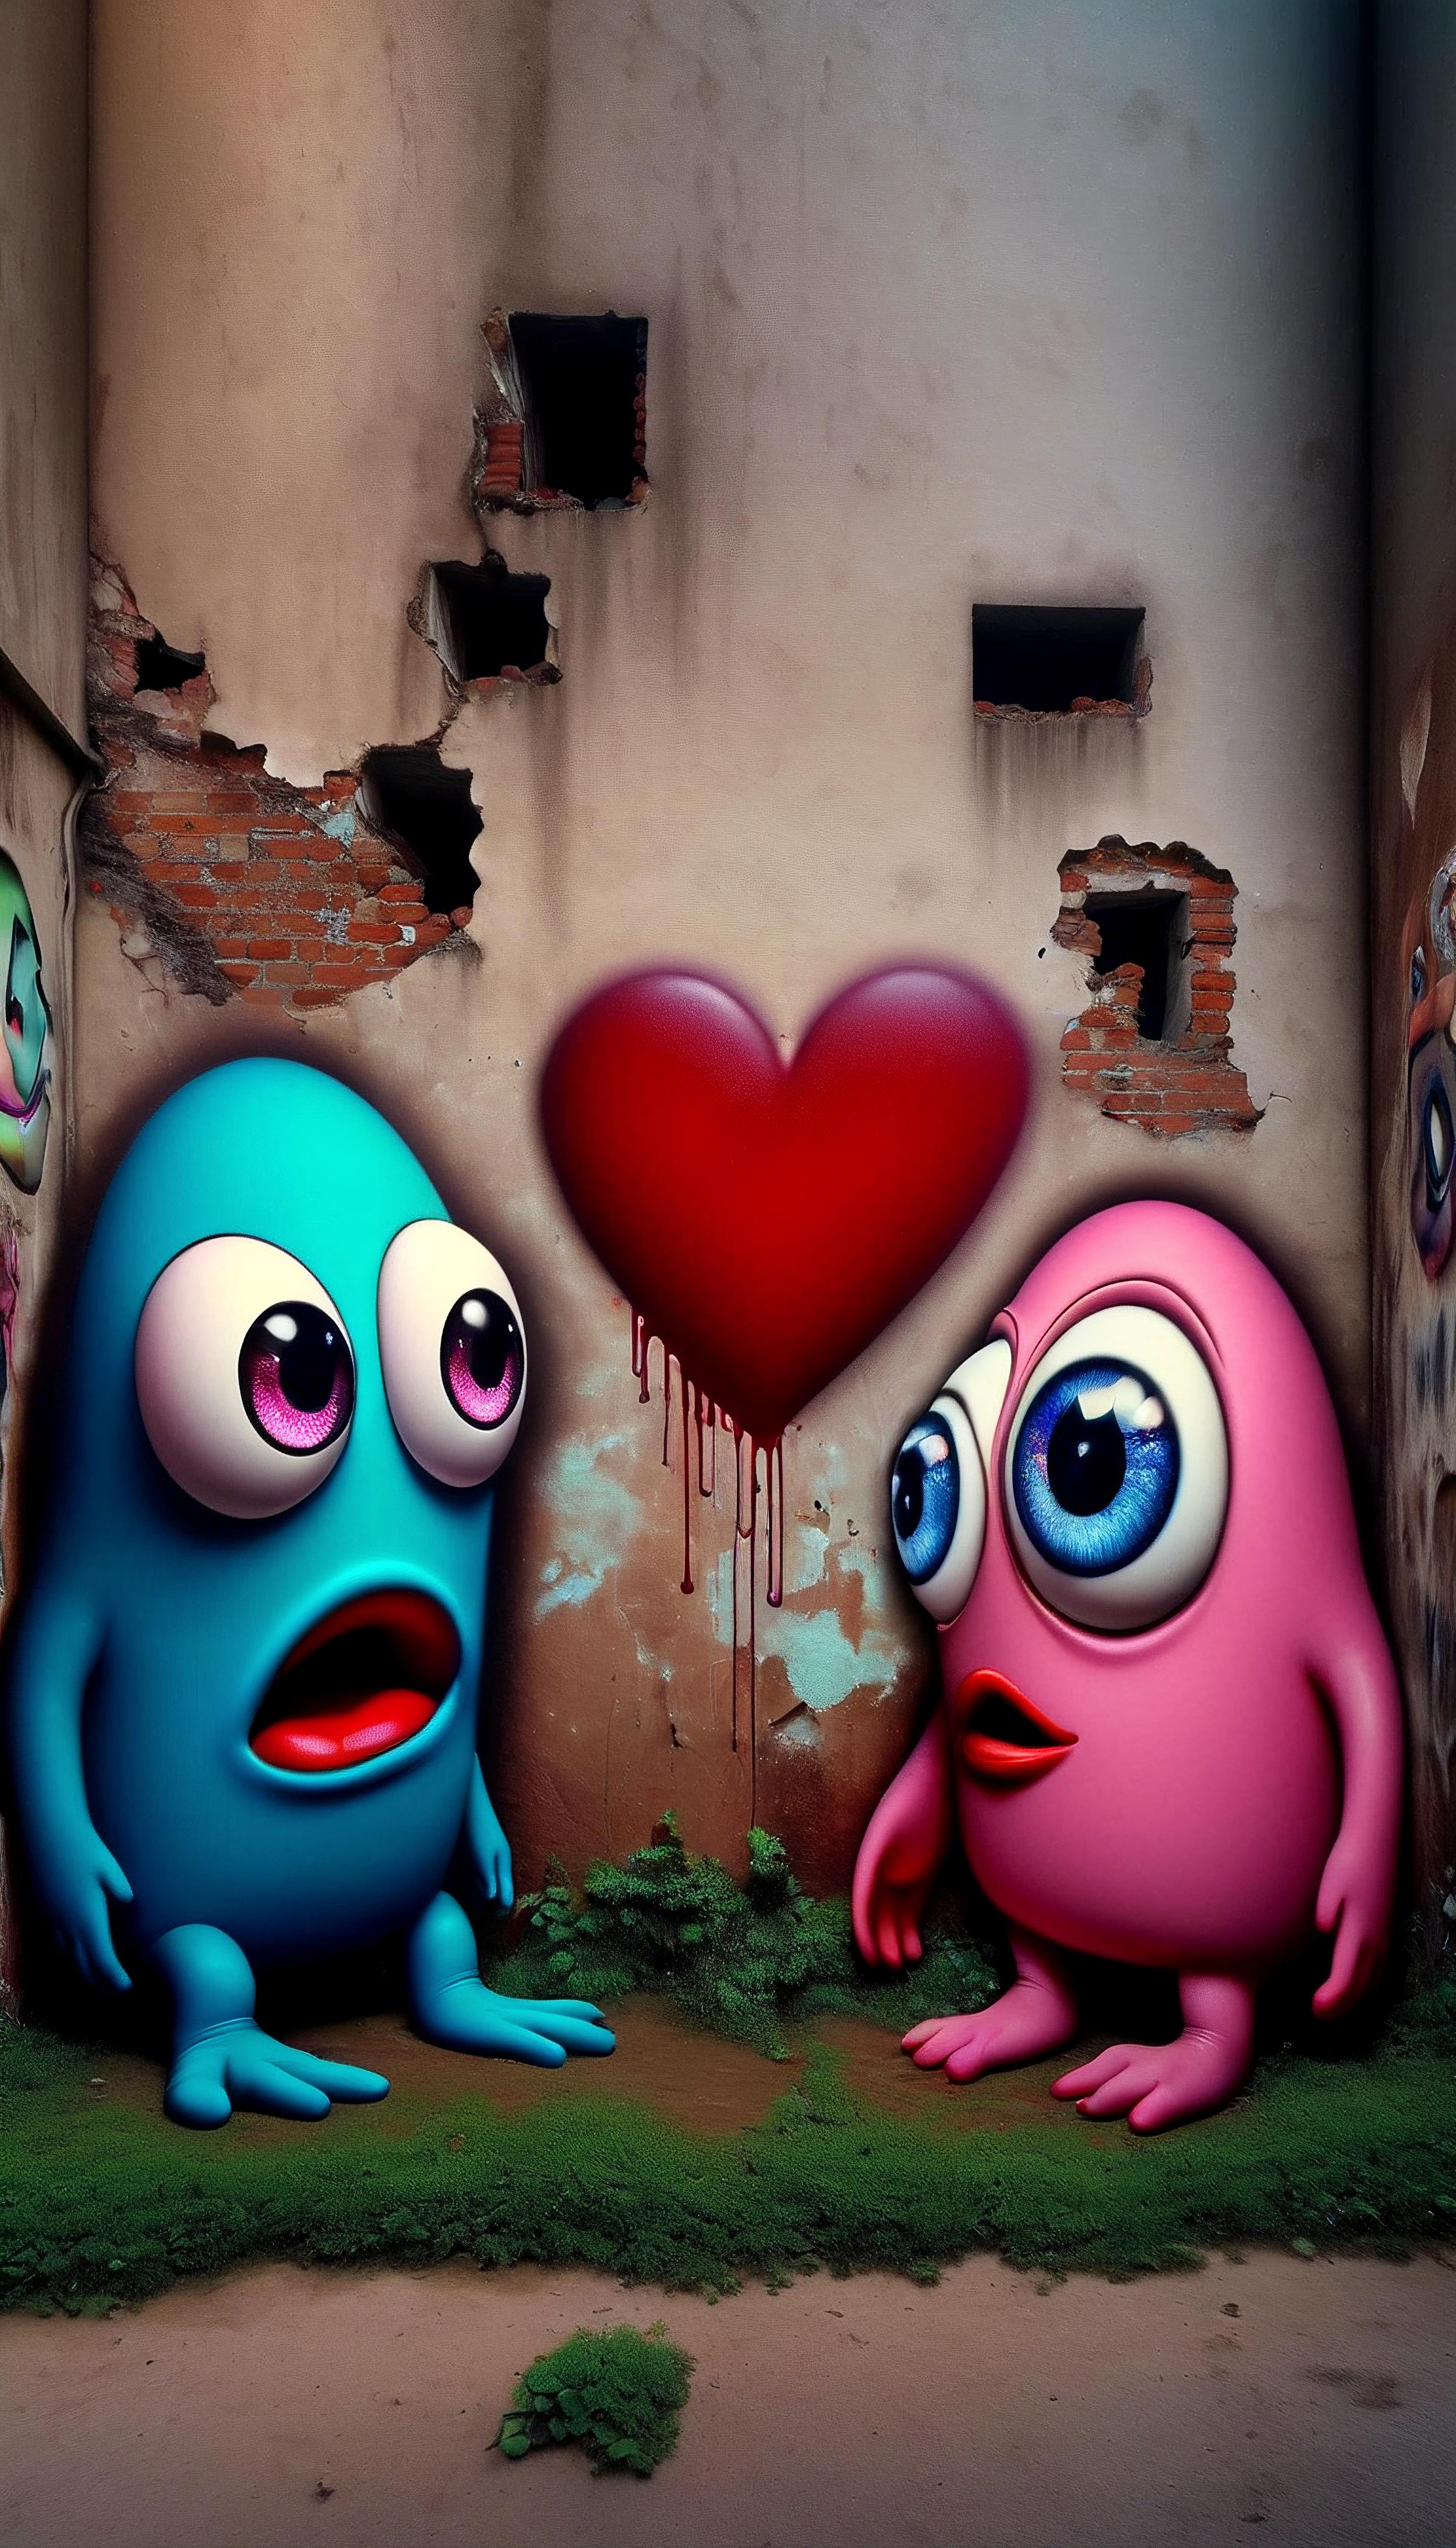 Two cartoon characters with hearts for eyes, one pink and one blue, standing in front of a brick wall.